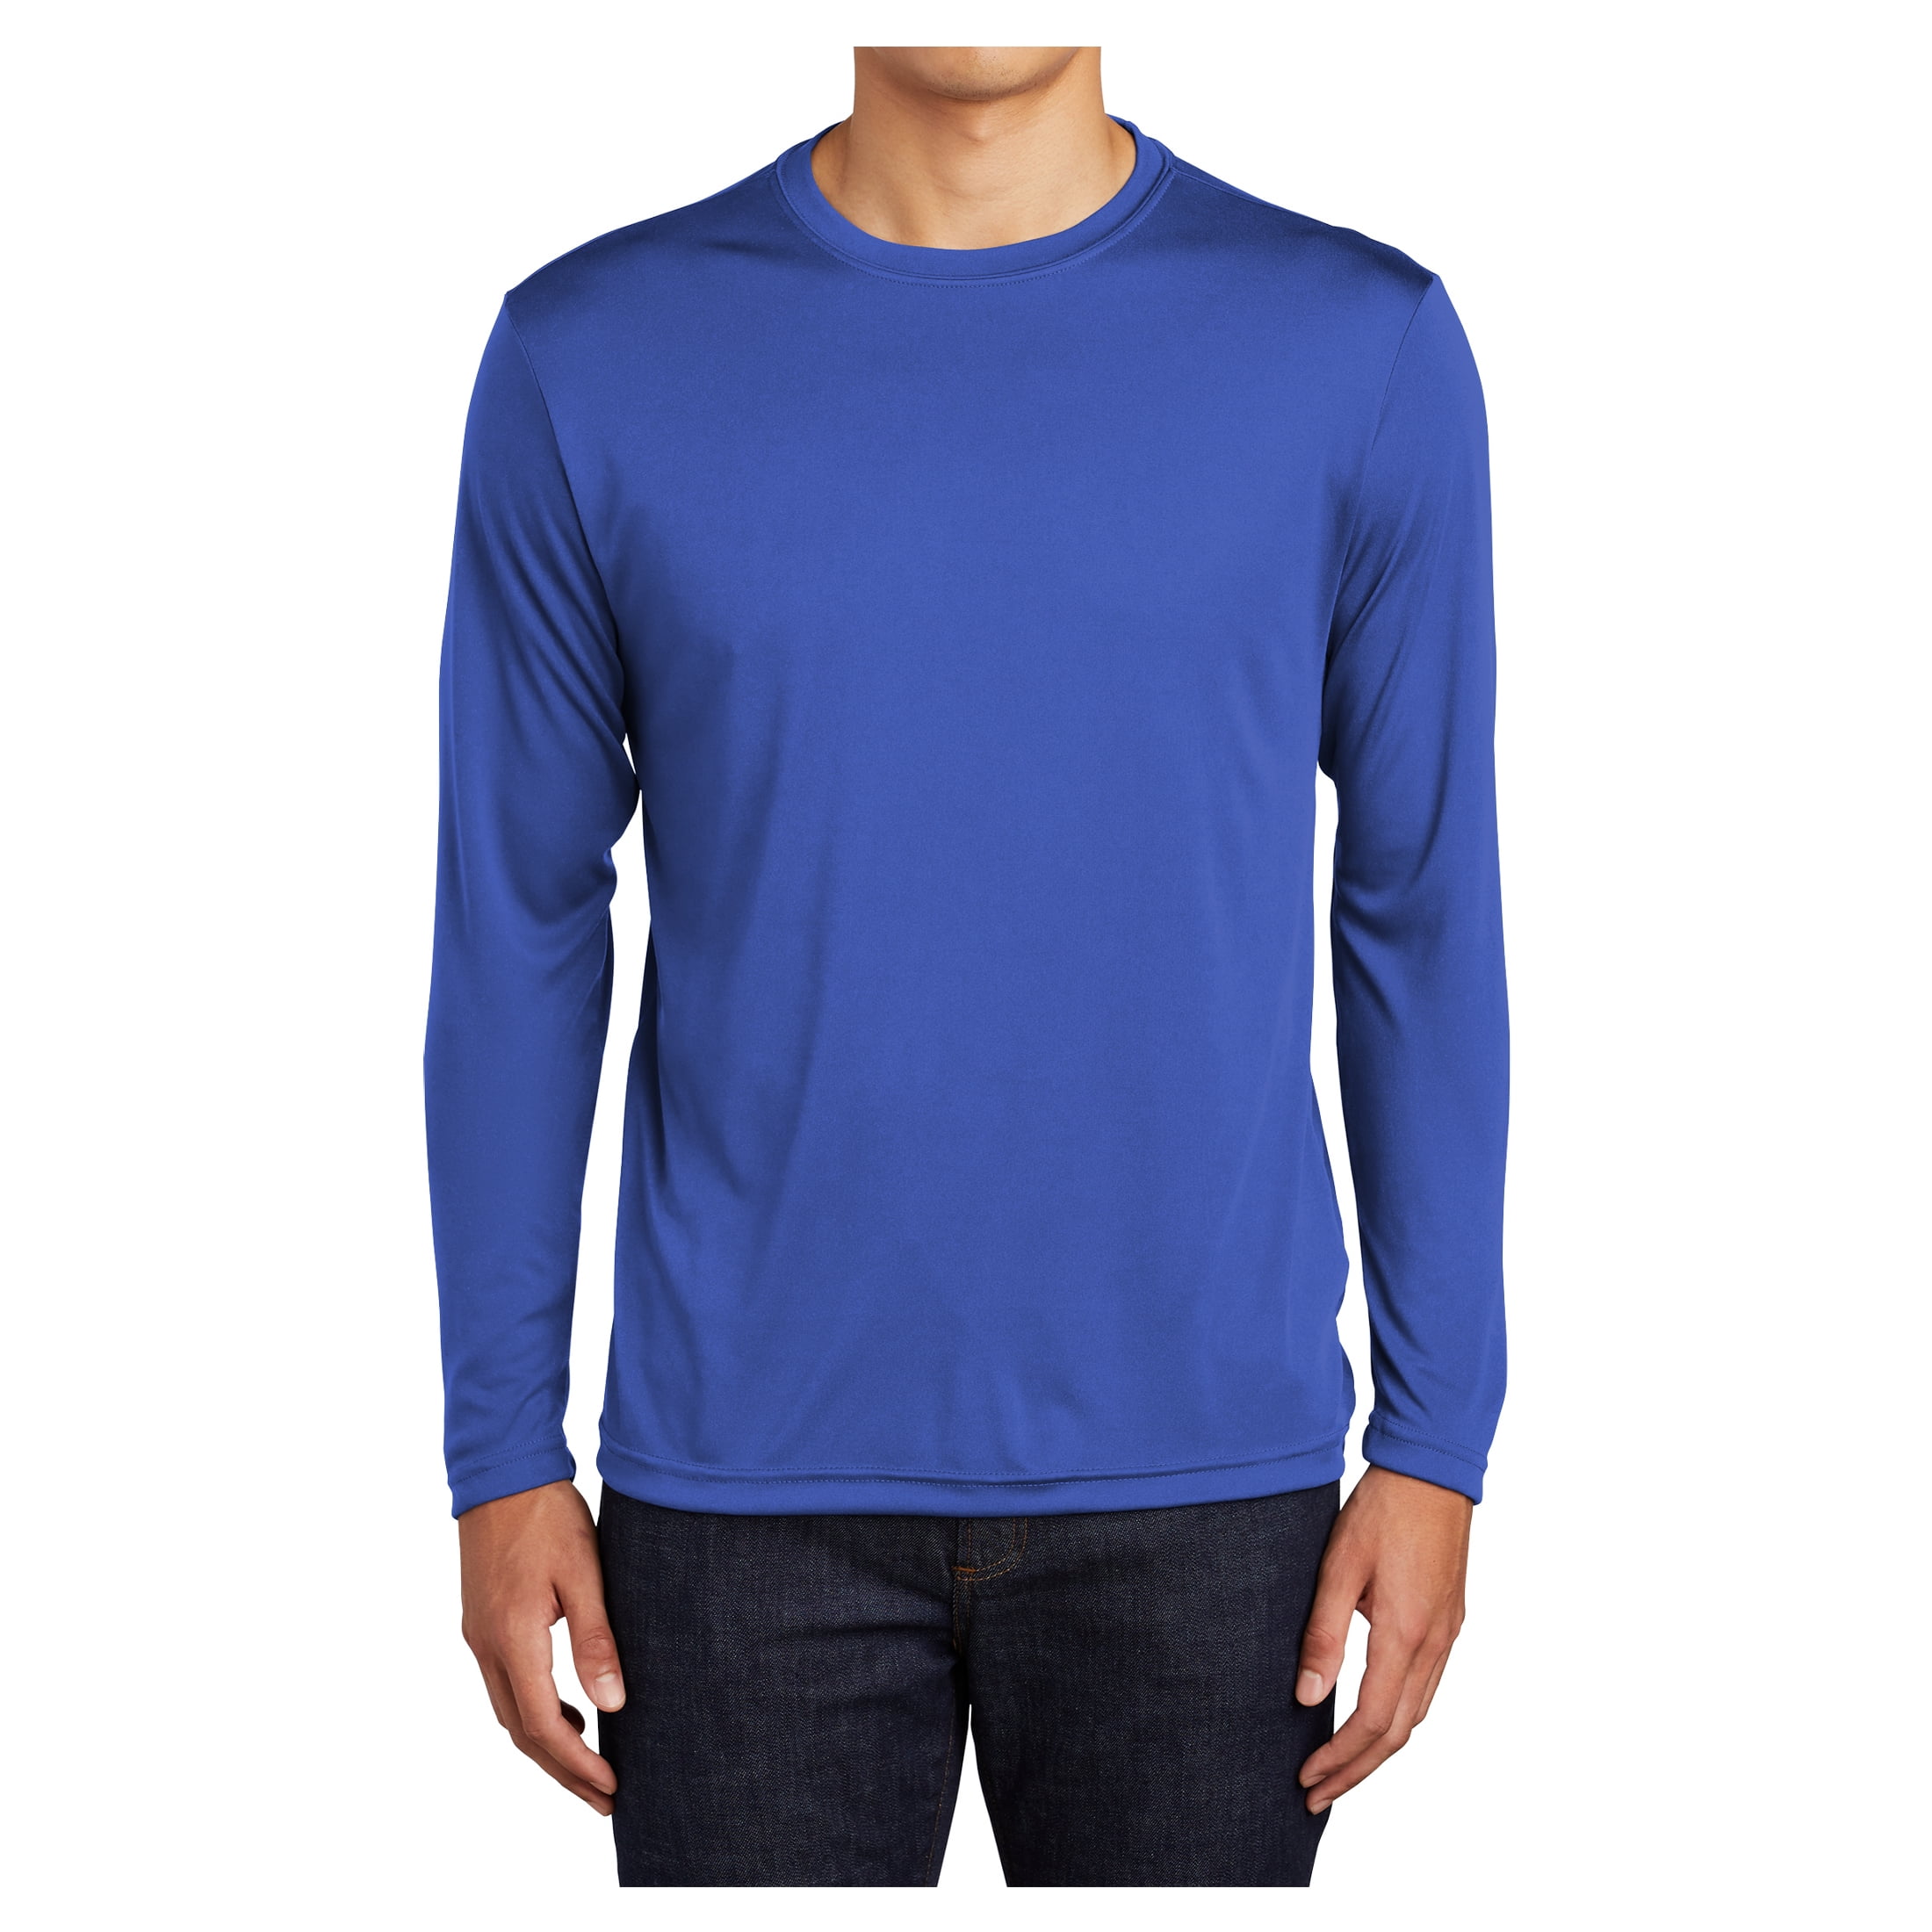 Mens Long Sleeve PosiCharge Competitor Polyester Tee Shirt Neon